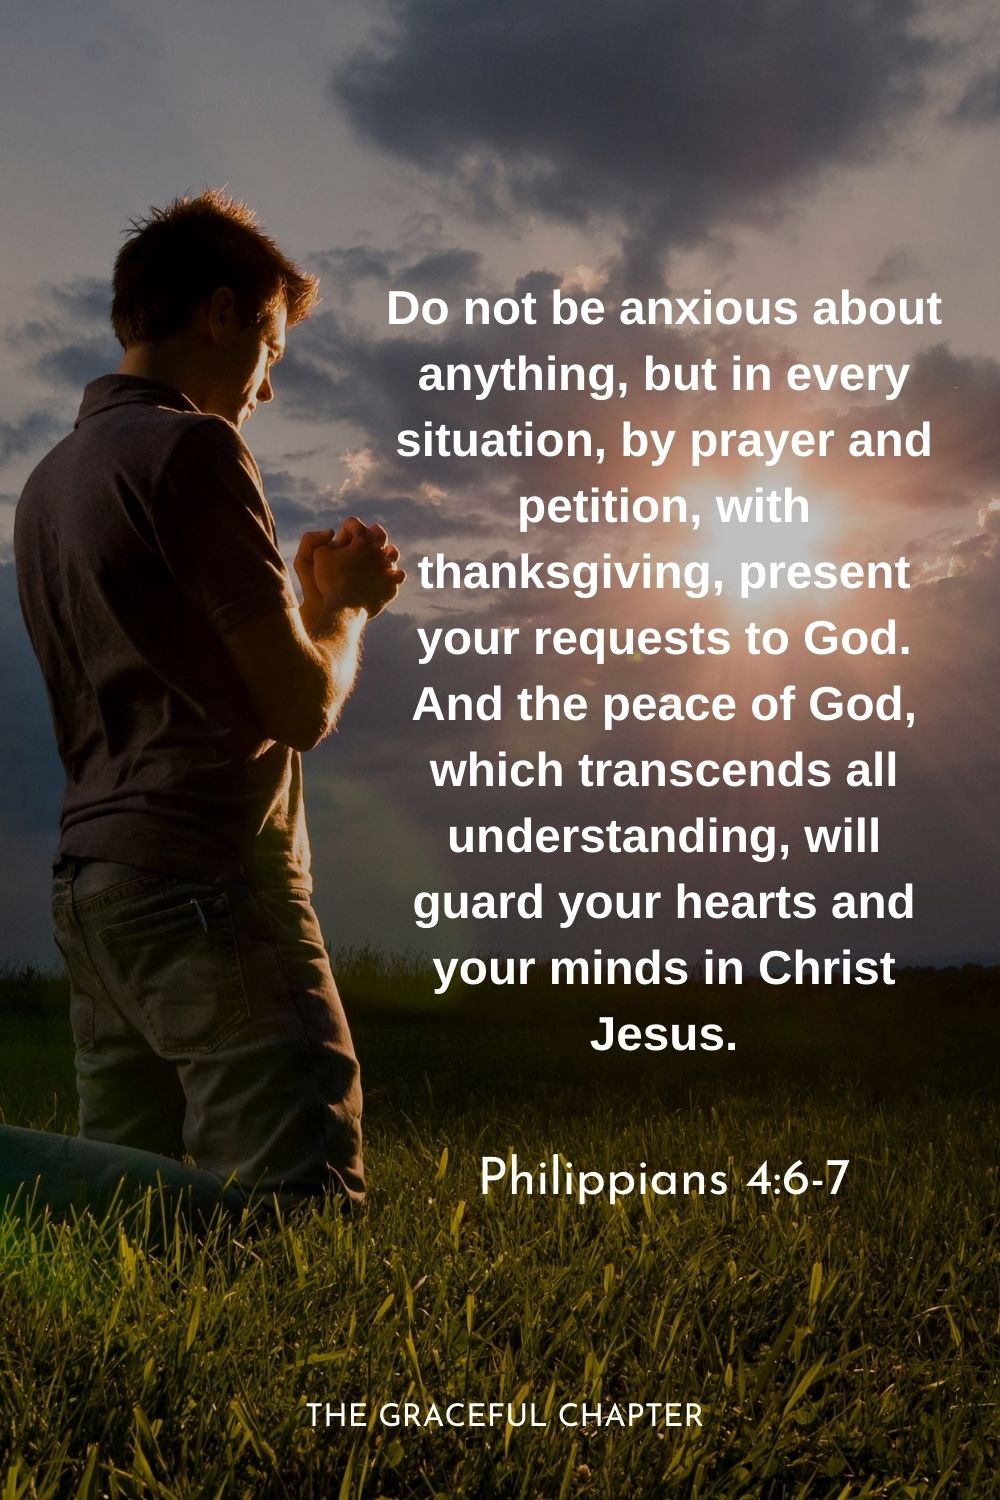 Do not be anxious about anything, but in every situation, by prayer and petition, with thanksgiving, present your requests to God. And the peace of God, which transcends all understanding, will guard your hearts and your minds in Christ Jesus.